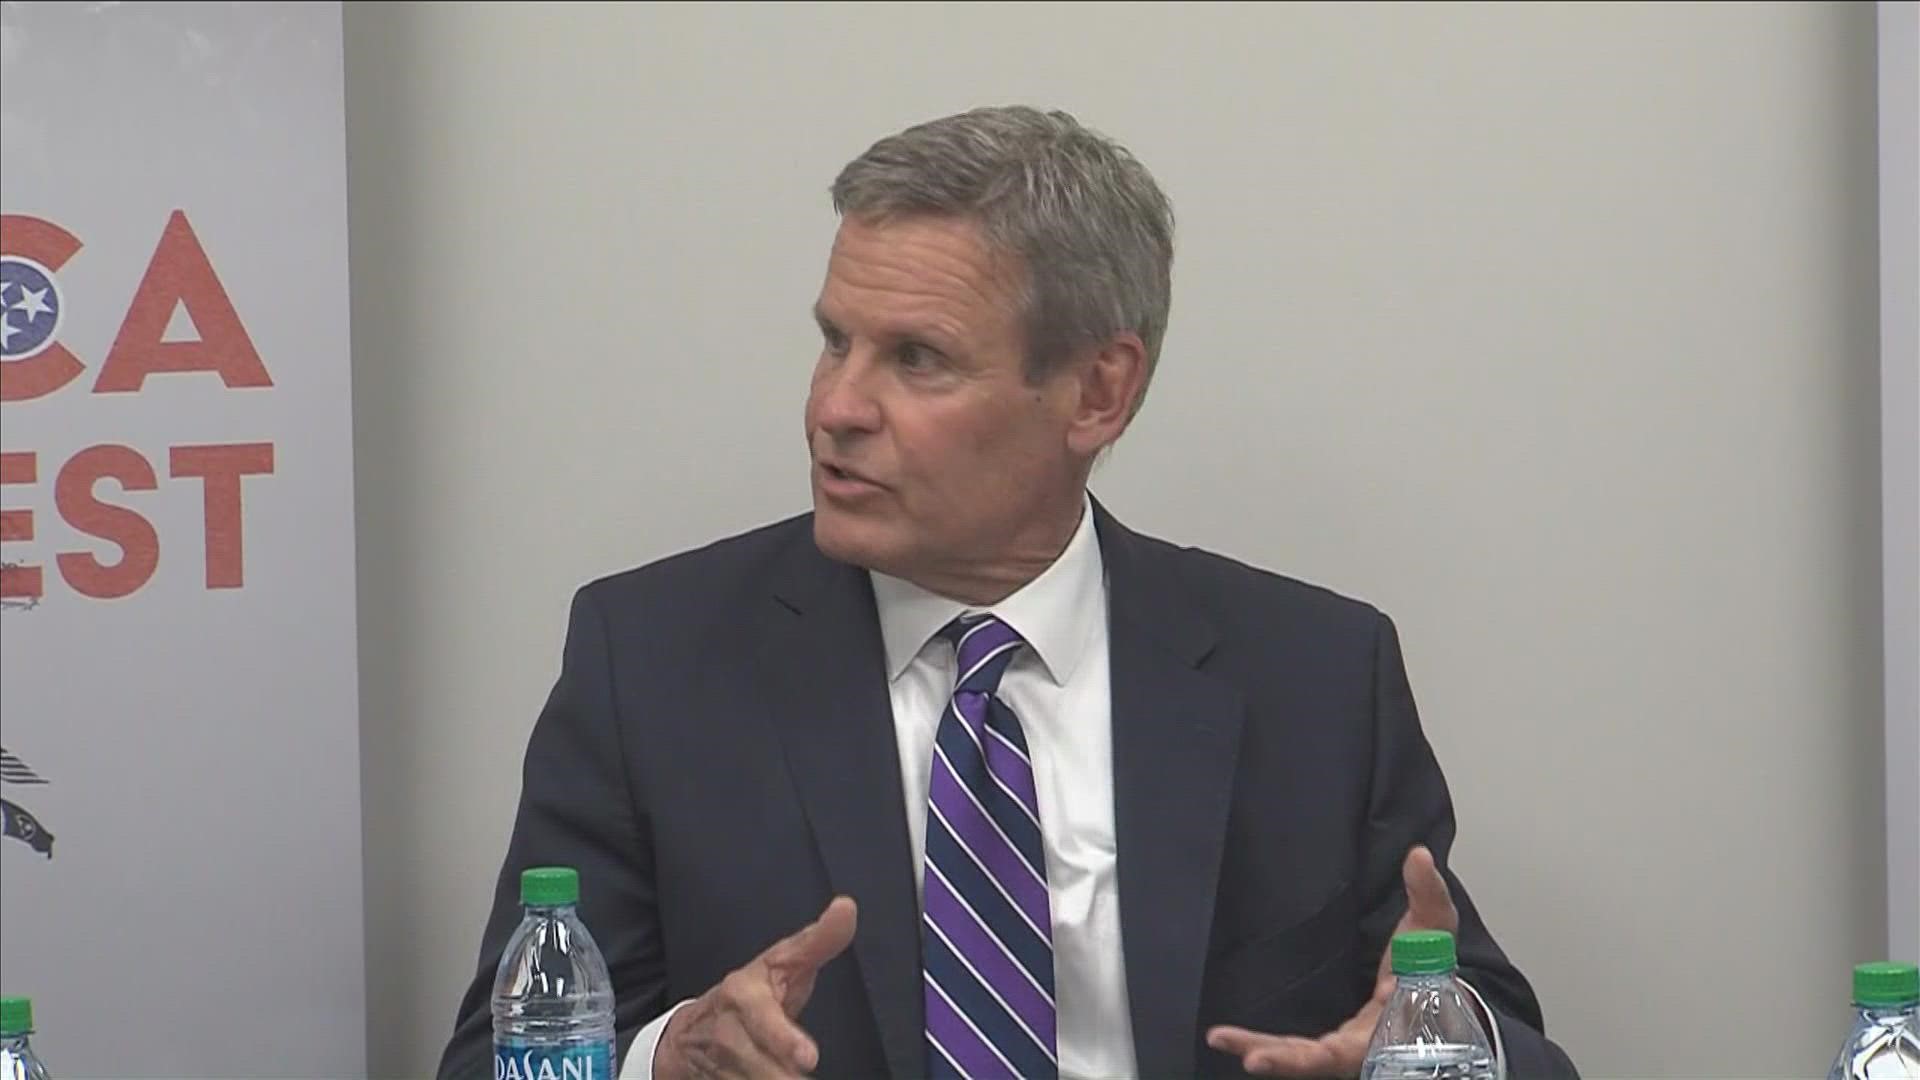 Gov. Bill Lee is requesting immediate relief for Tennessee taxpayers by including a 30-day grocery tax suspension proposal in the Fiscal Year 2022-2023 budget.